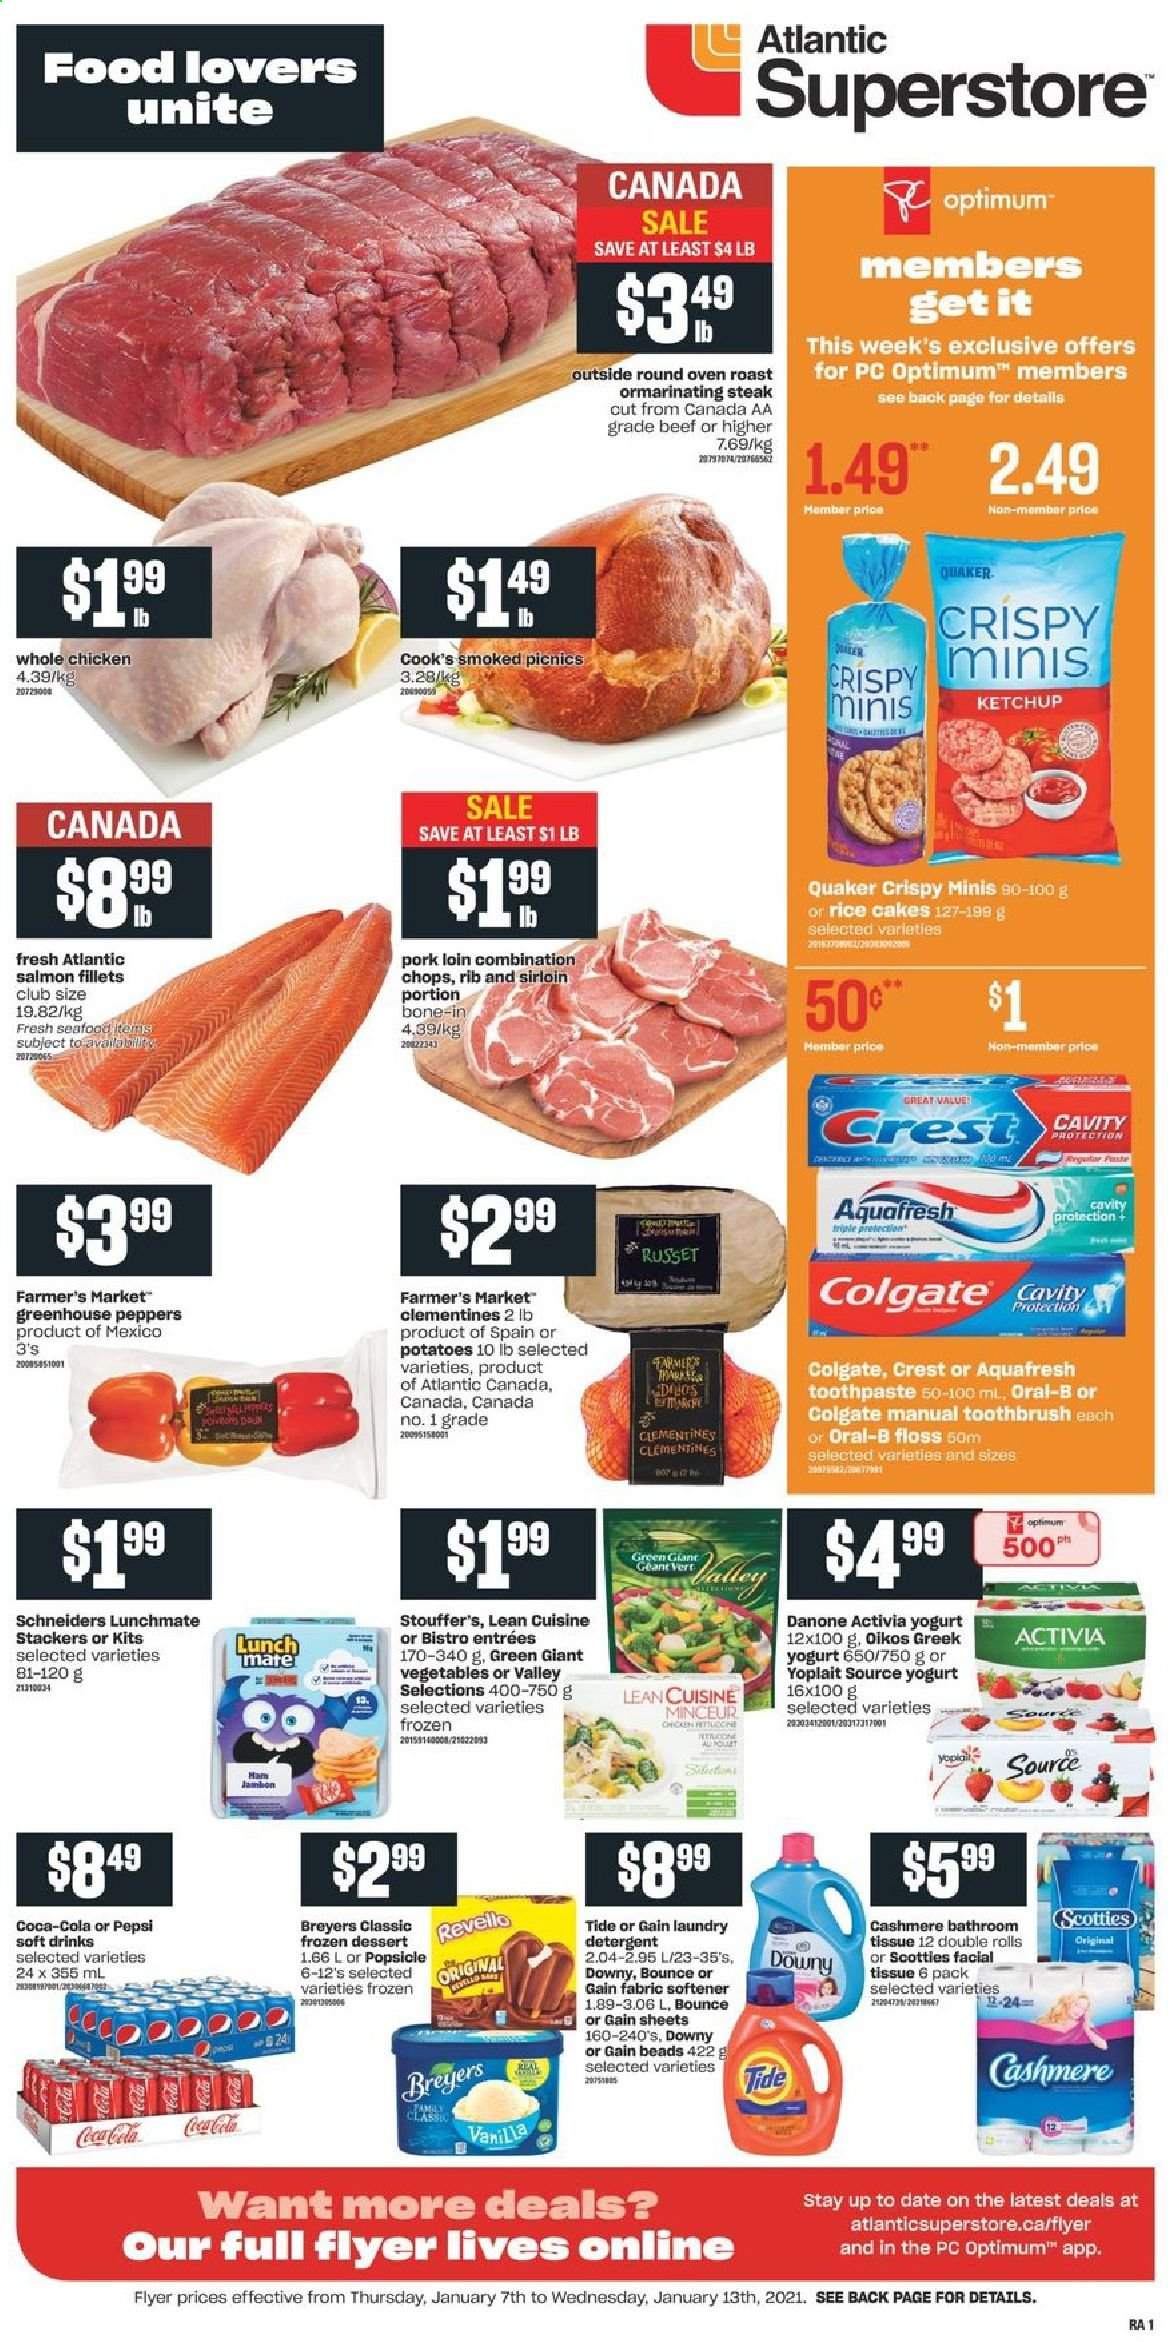 thumbnail - Atlantic Superstore Flyer - January 07, 2021 - January 13, 2021 - Sales products - russet potatoes, potatoes, peppers, clementines, salmon, salmon fillet, Quaker, Lean Cuisine, ham, Cook's, greek yoghurt, yoghurt, Activia, Oikos, Yoplait, Stouffer's, Coca-Cola, Pepsi, soft drink, whole chicken, chicken, pork loin, pork meat, bath tissue, Gain, Tide, fabric softener, laundry detergent, toothbrush, toothpaste, Crest, Optimum, Danone, Oral-B, steak. Page 1.